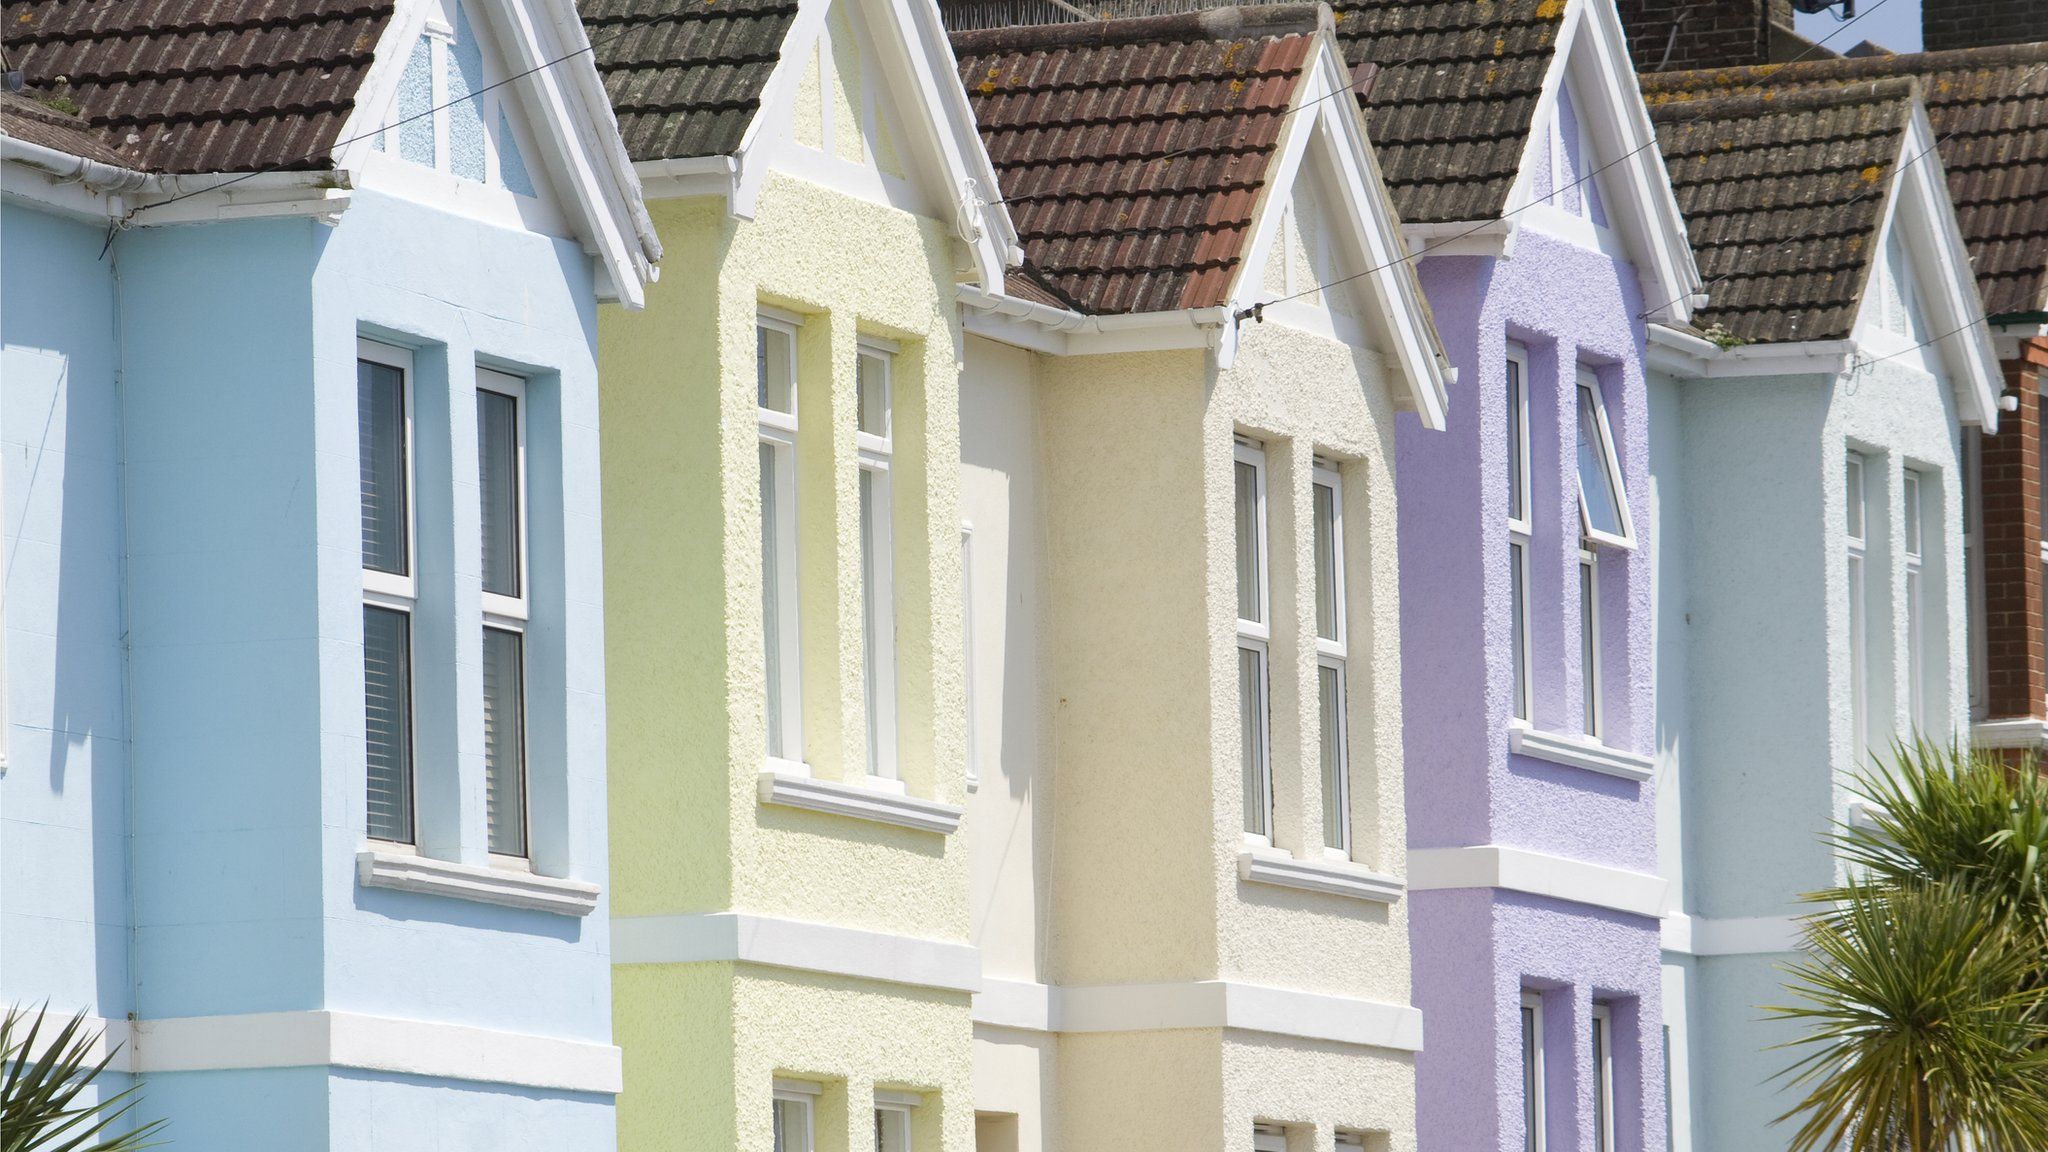 A close up of five pastel painted homes in Brighton